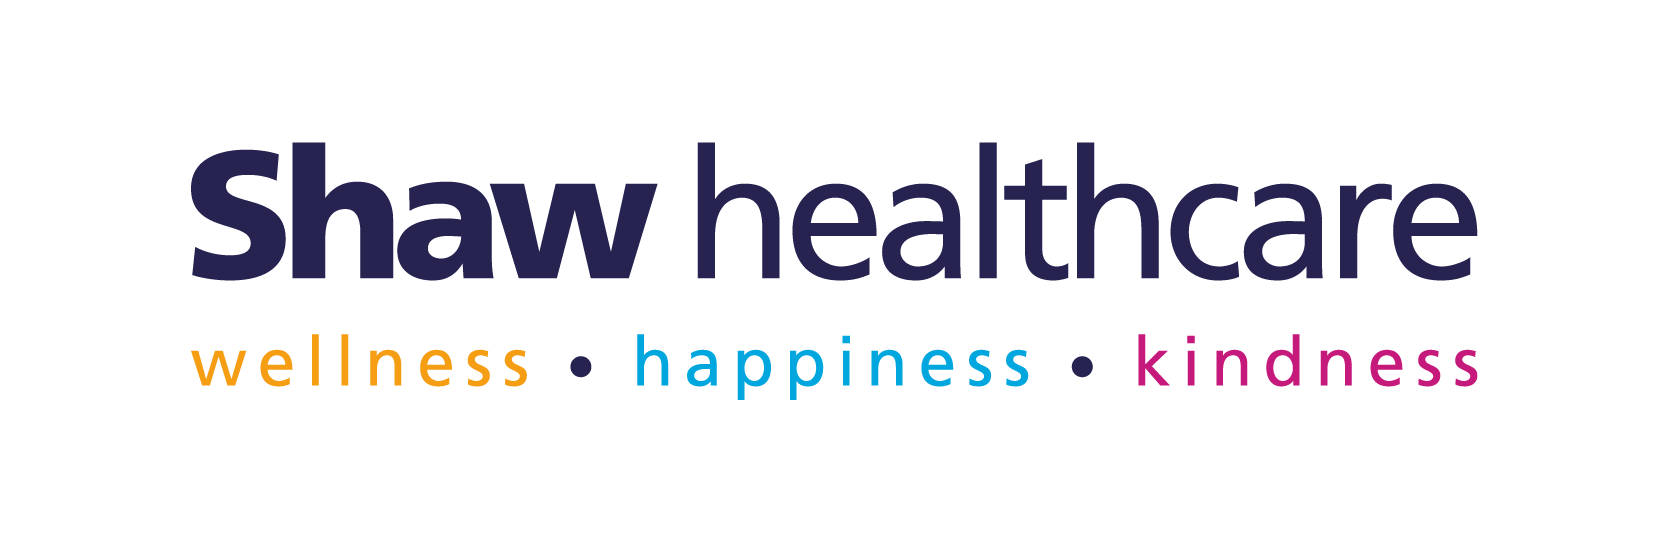 logo for Shaw healthcare